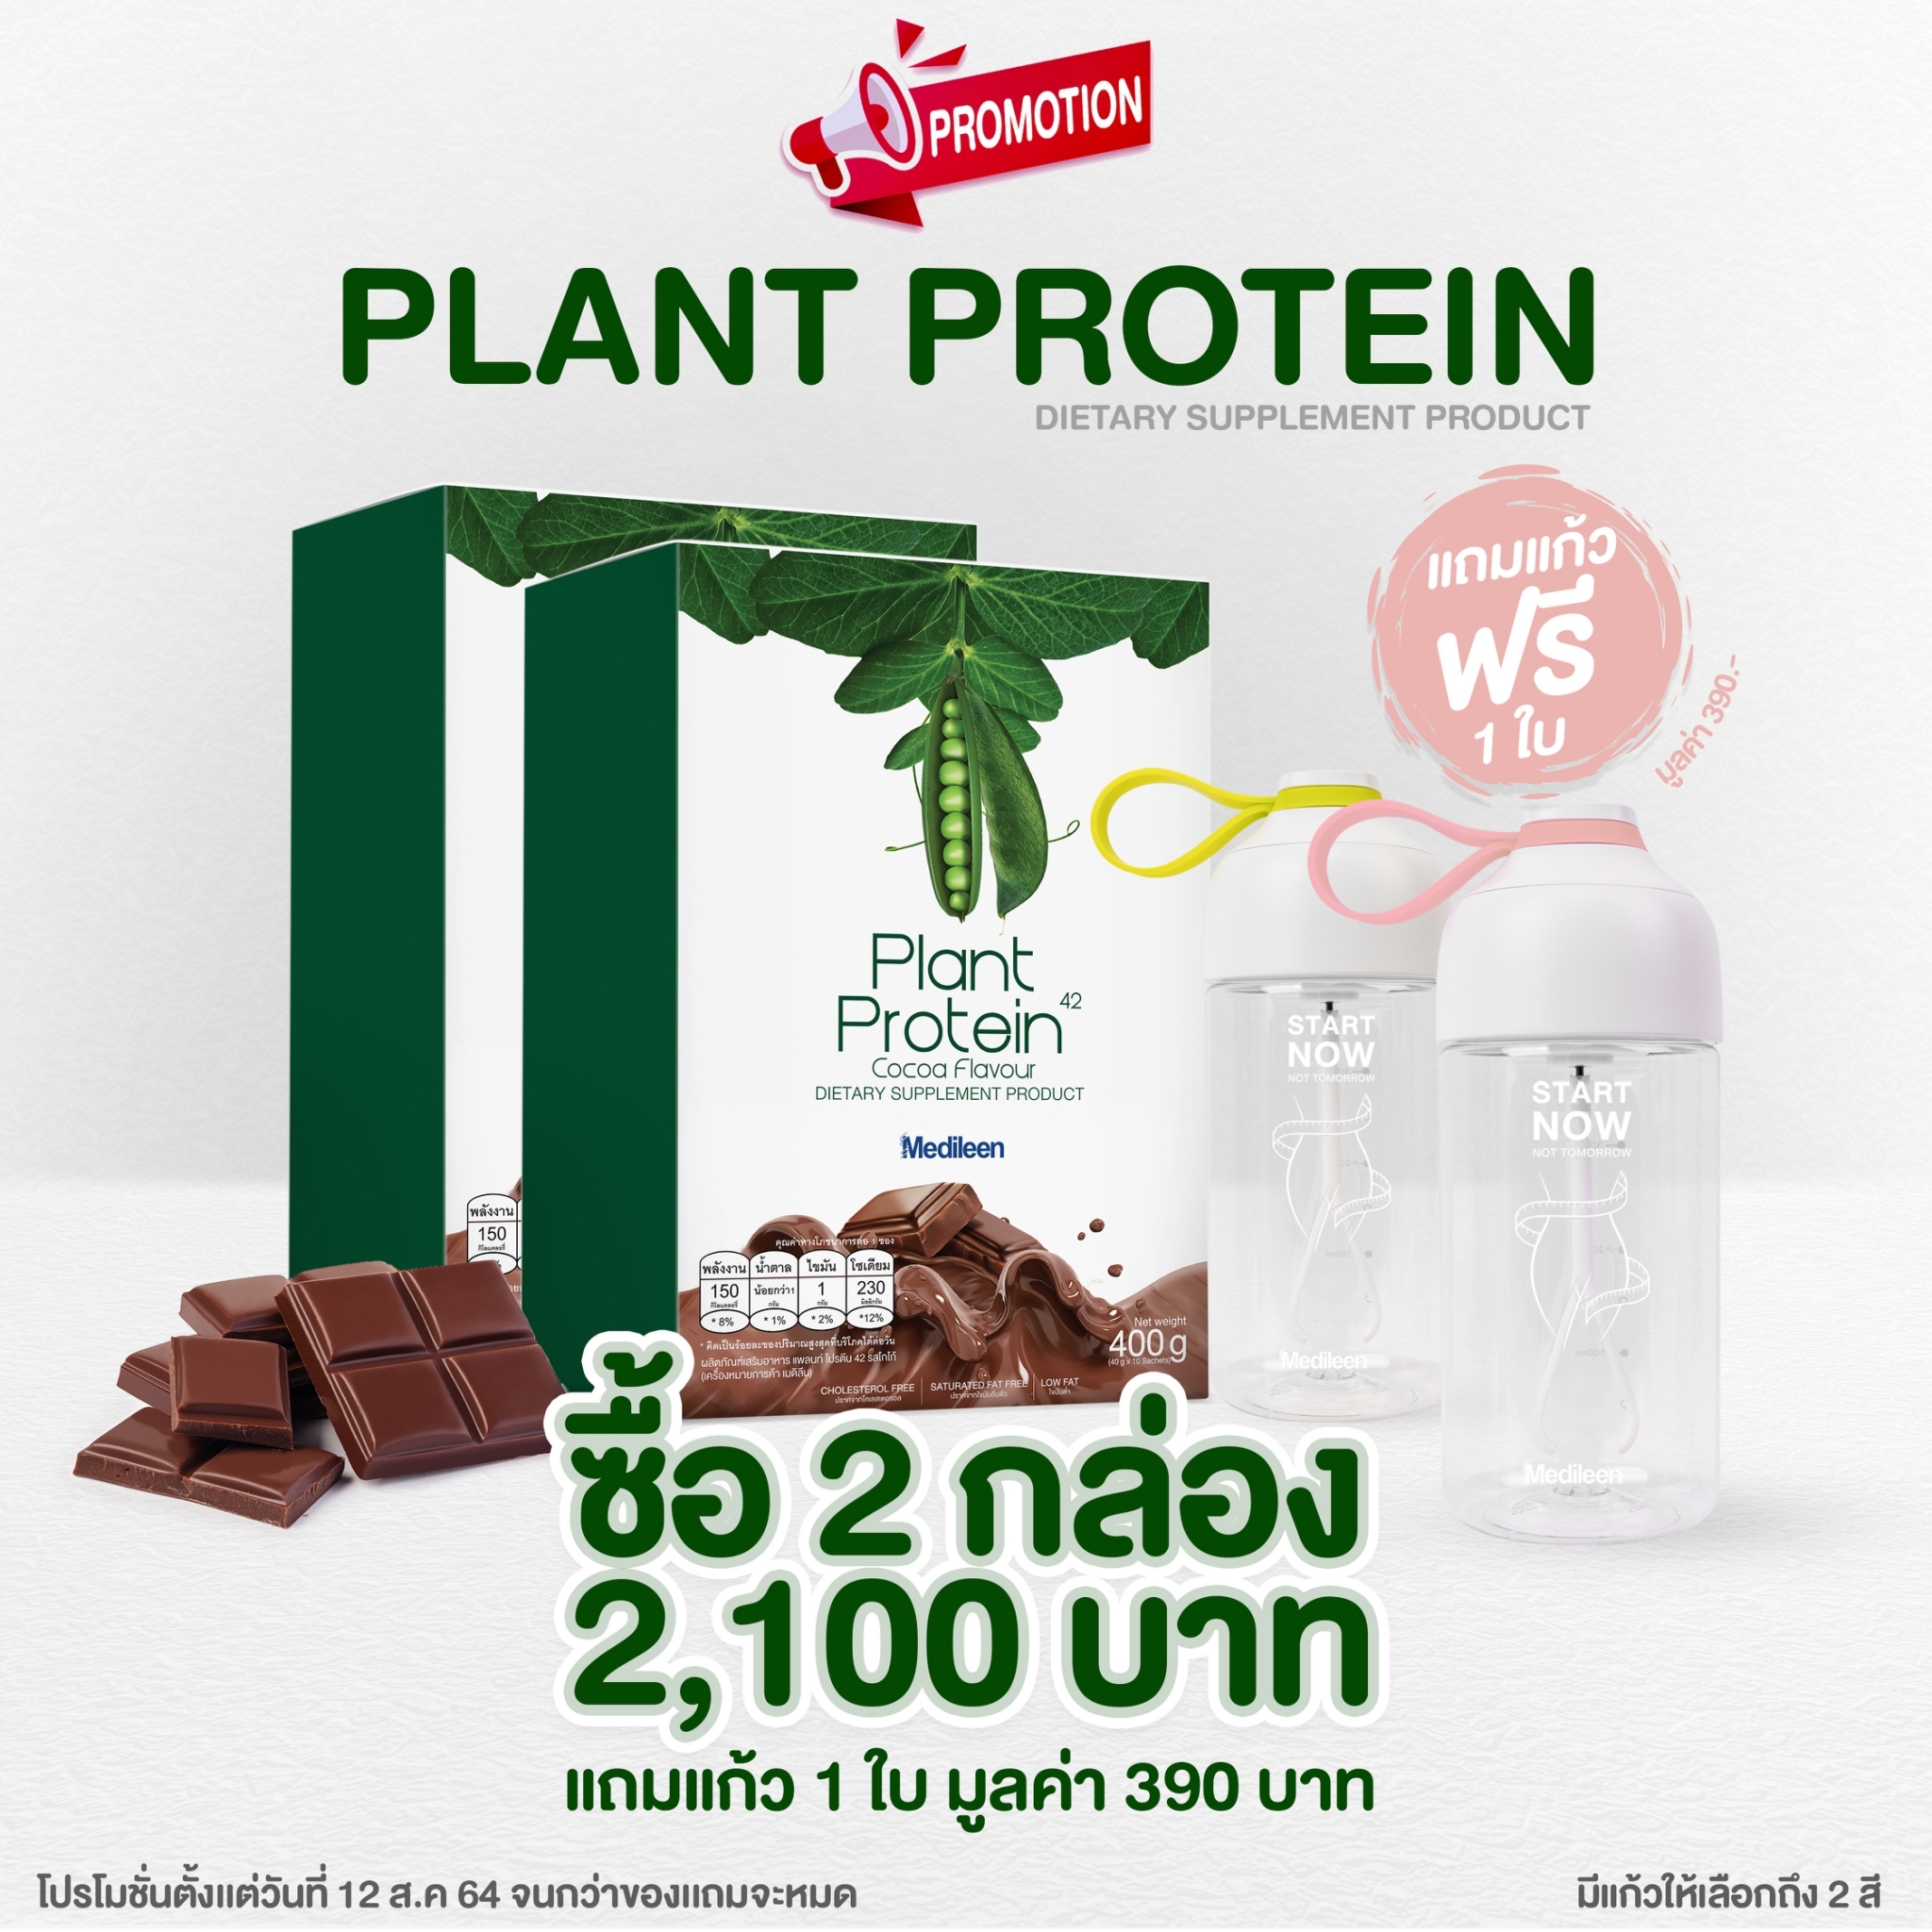 Plant Protein 2 chocolate